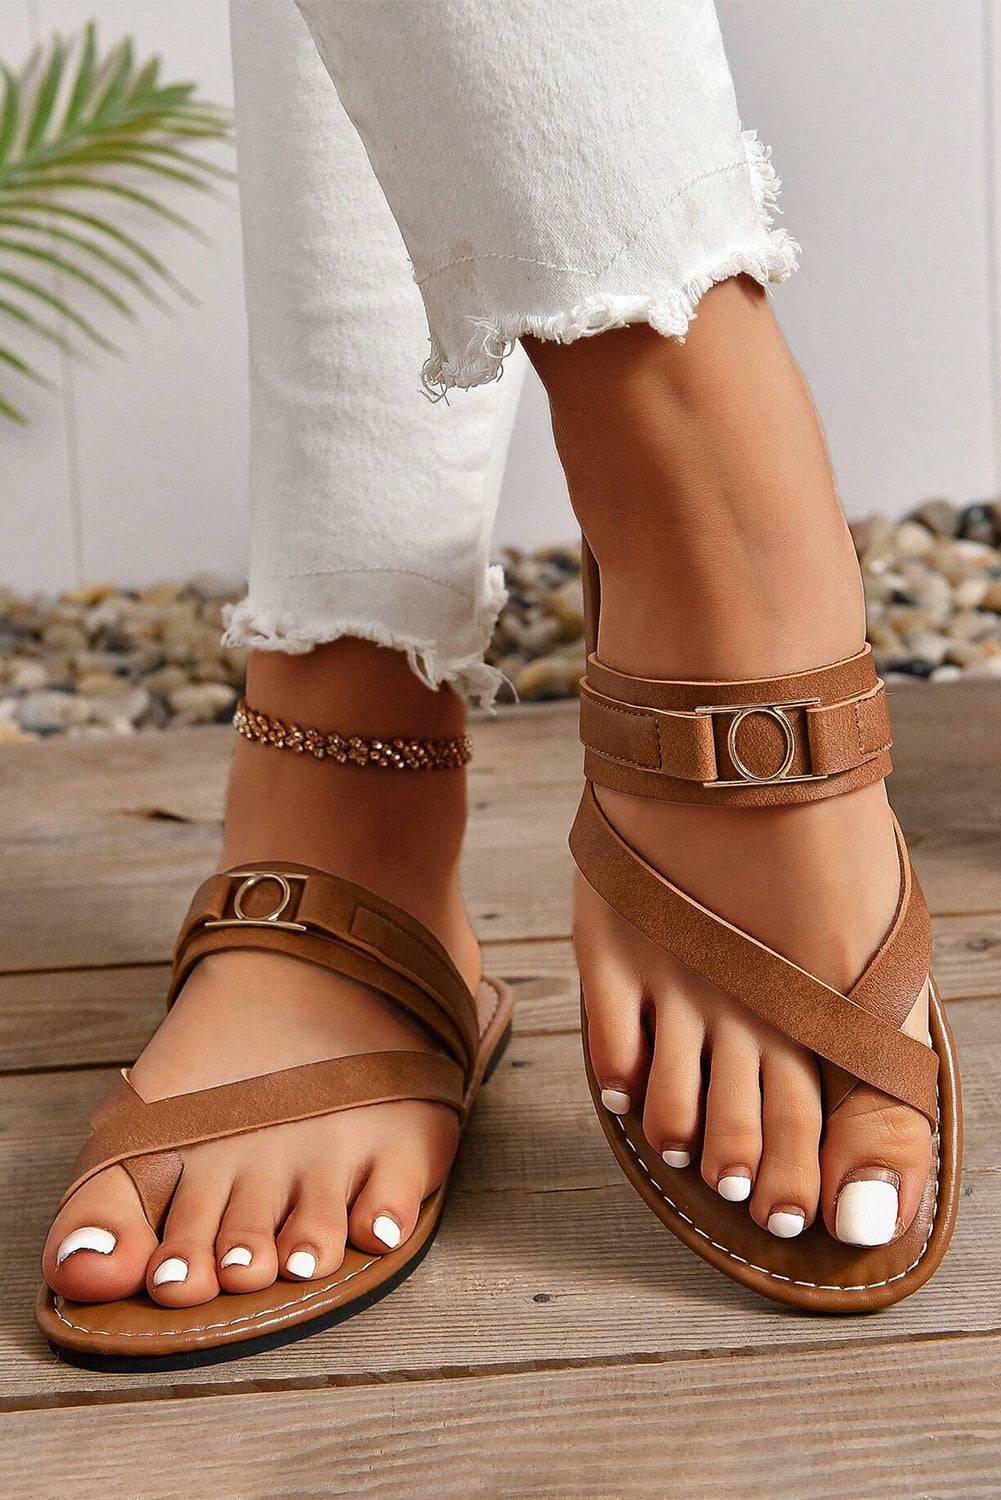 a close up of a person wearing sandals